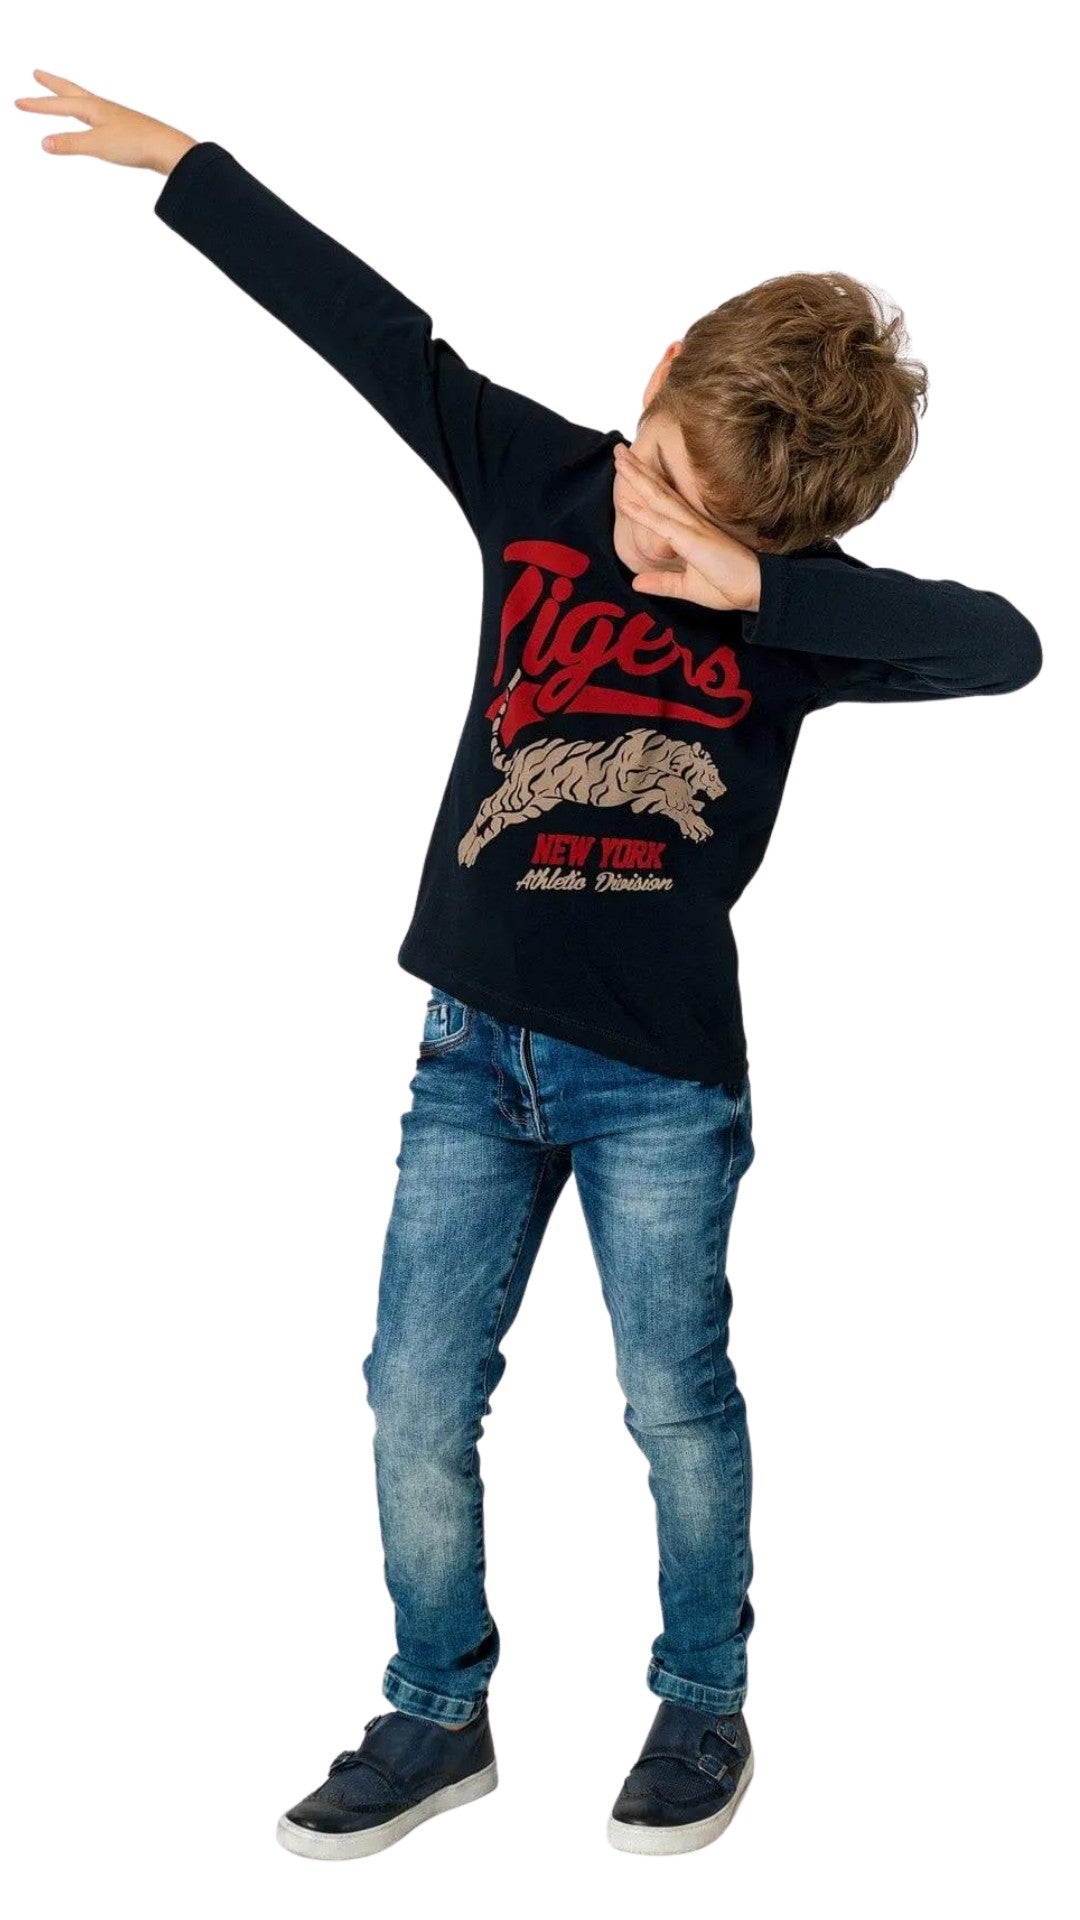 InCity Boys Tween 7-14 Years Red White Gray Long Sleeve Round Neck Comfy Casual Canadian Long Sleeve T-Shirt InCity Boys & Girls